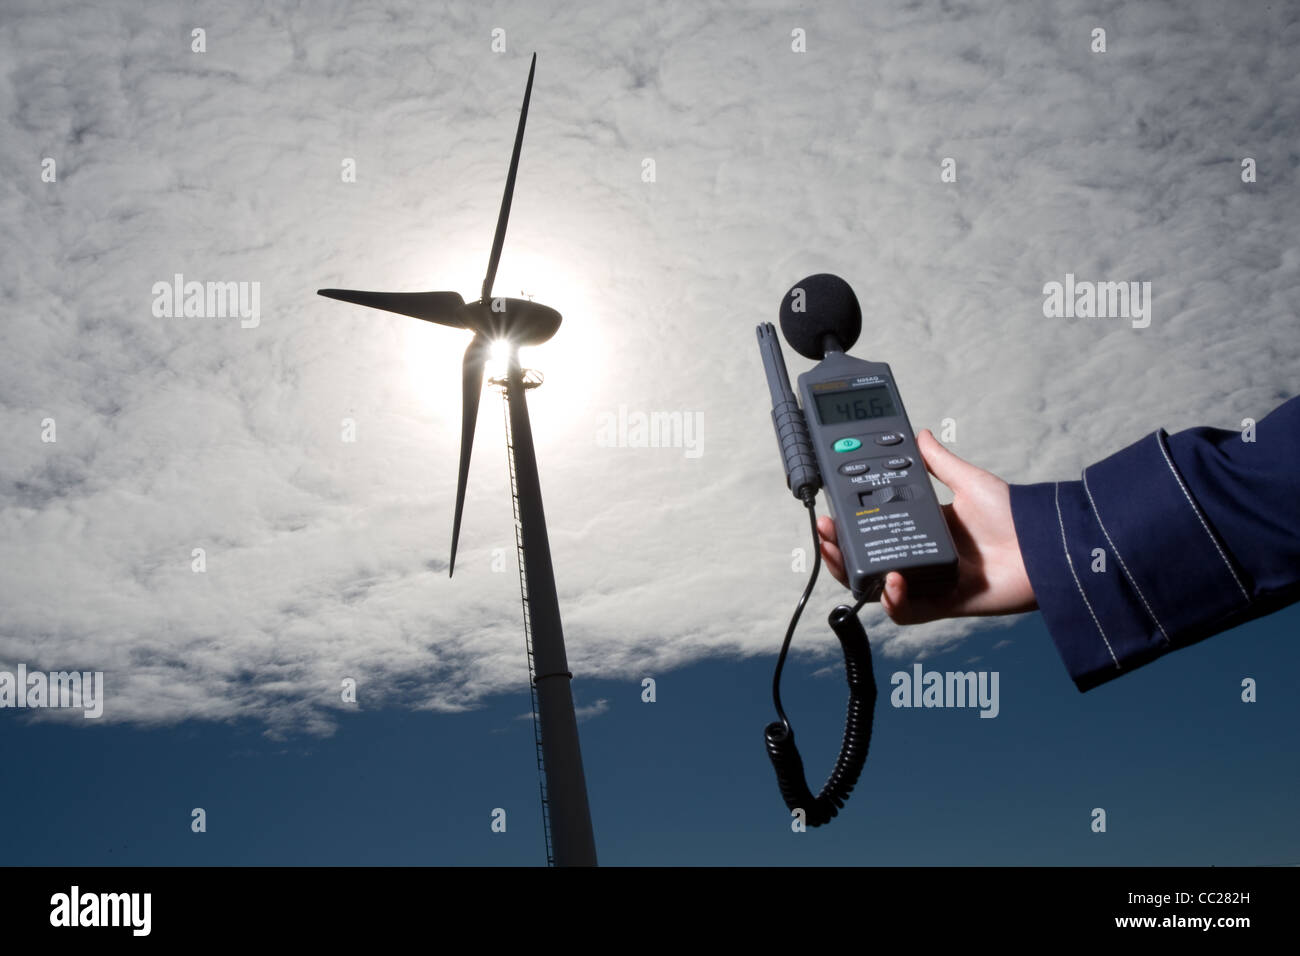 A sound level meter is held up to a wind turbine to measure the noise emitted in decibels. Stock Photo